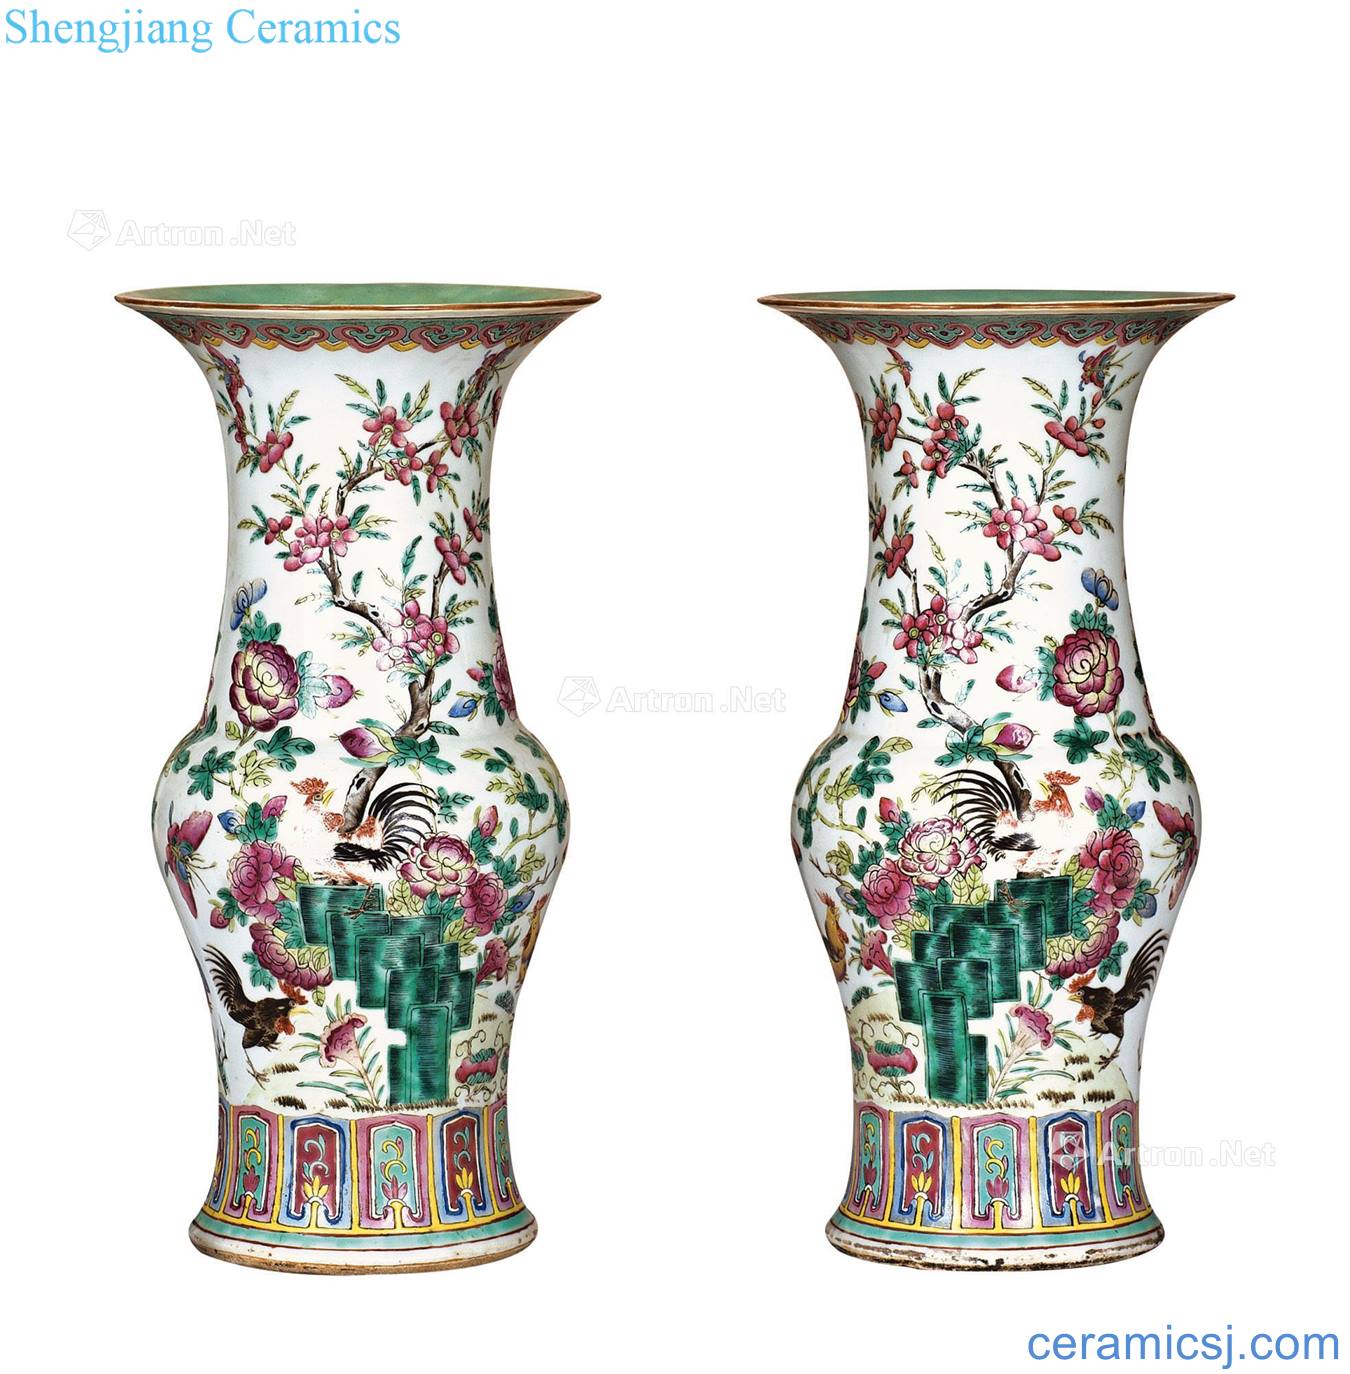 Promotion on the flower vase with stagnation pastel officer